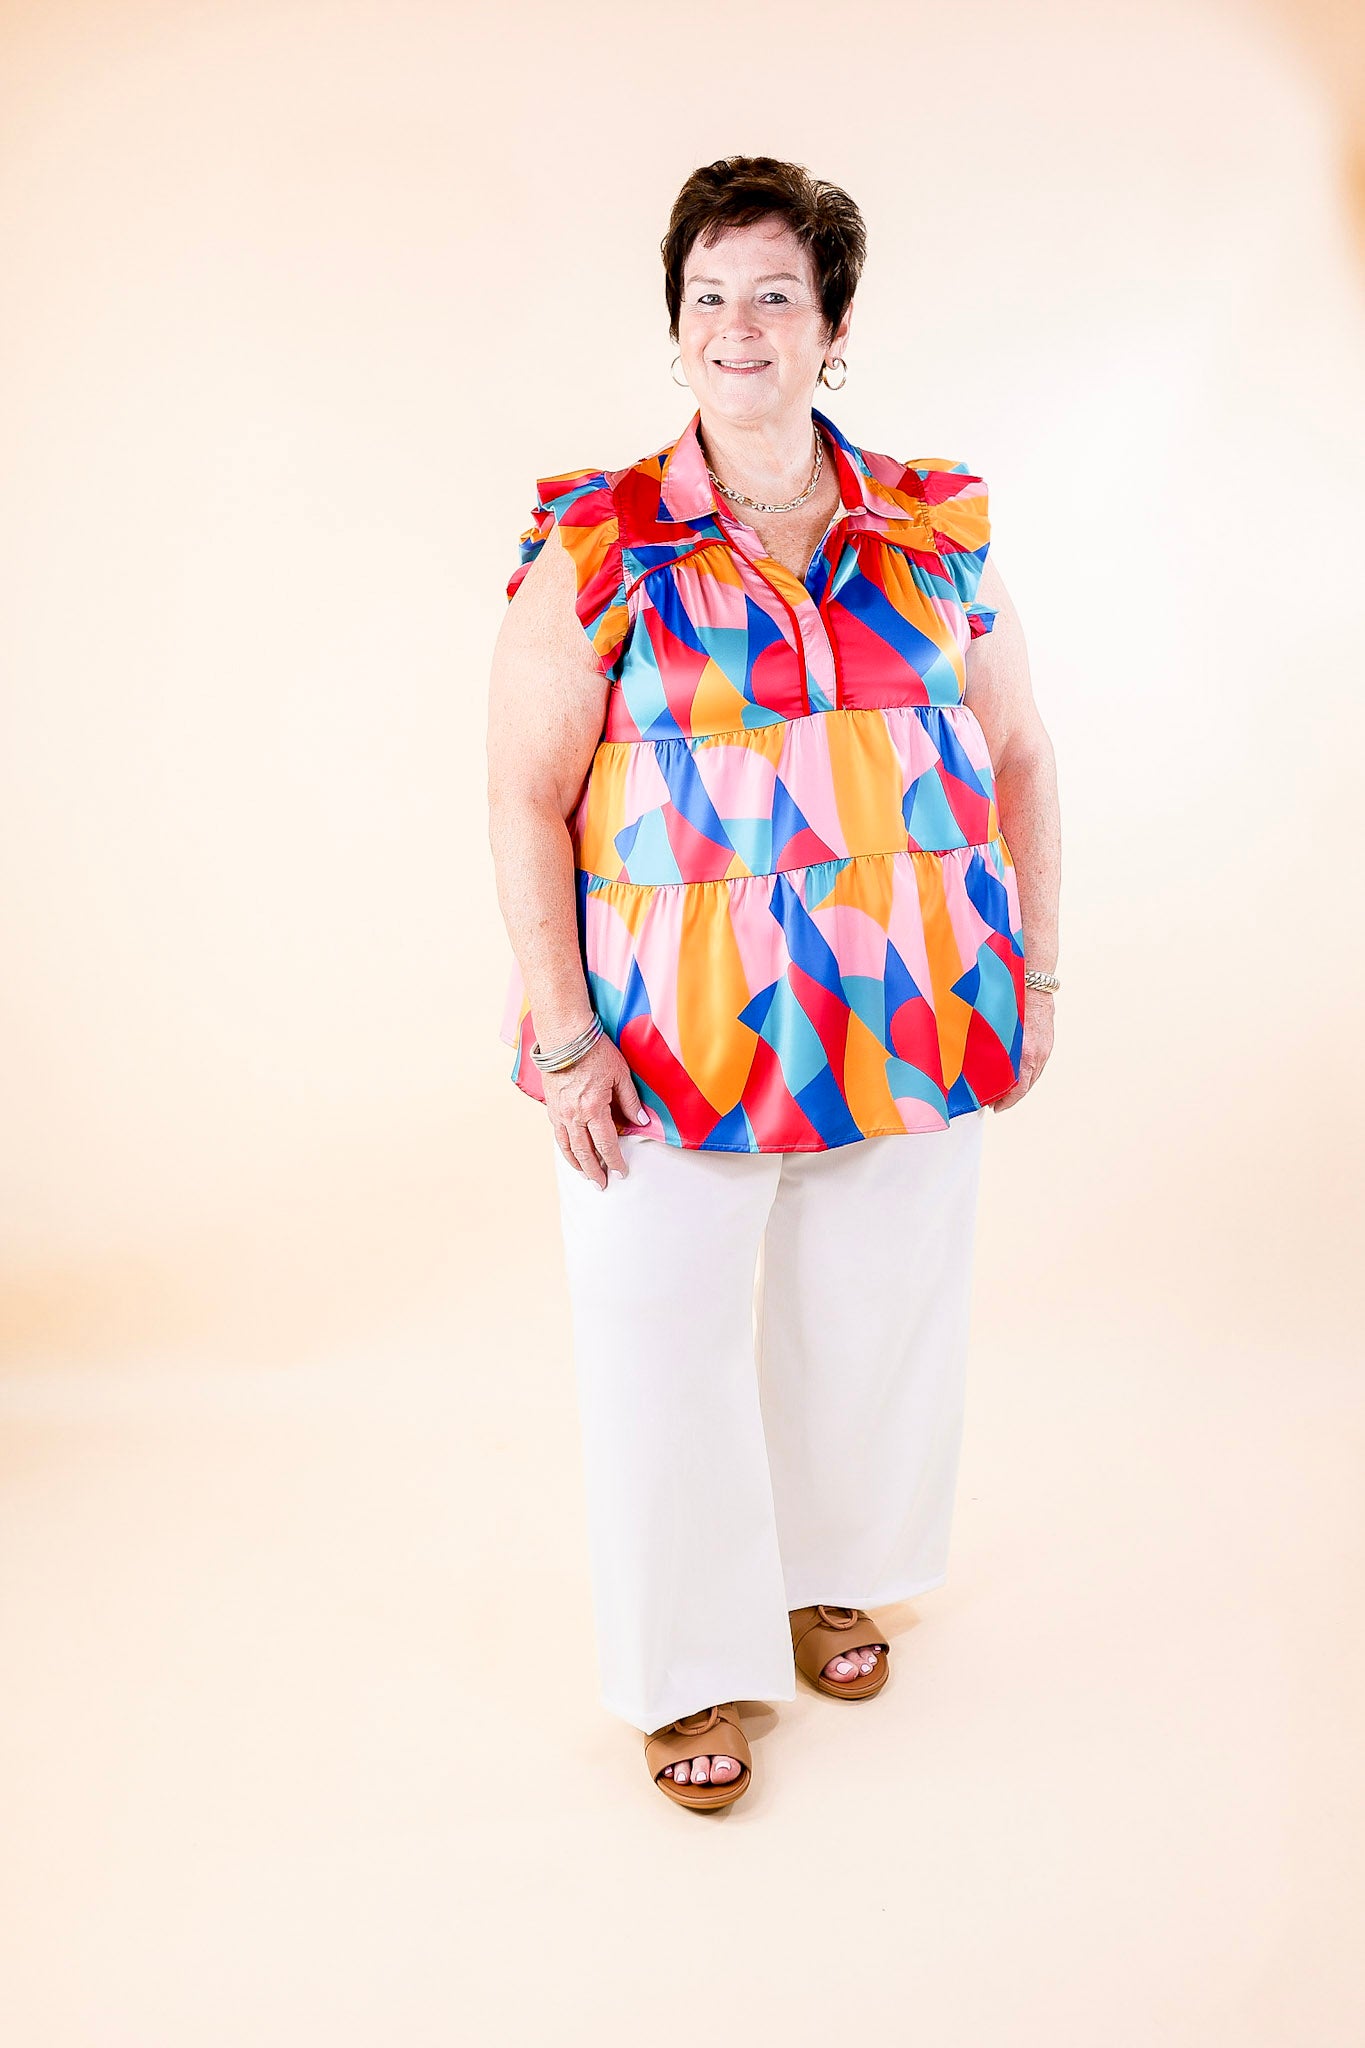 I Can't Wait V Neck with Ruffled Sleeves Top in Multicolor - Giddy Up Glamour Boutique